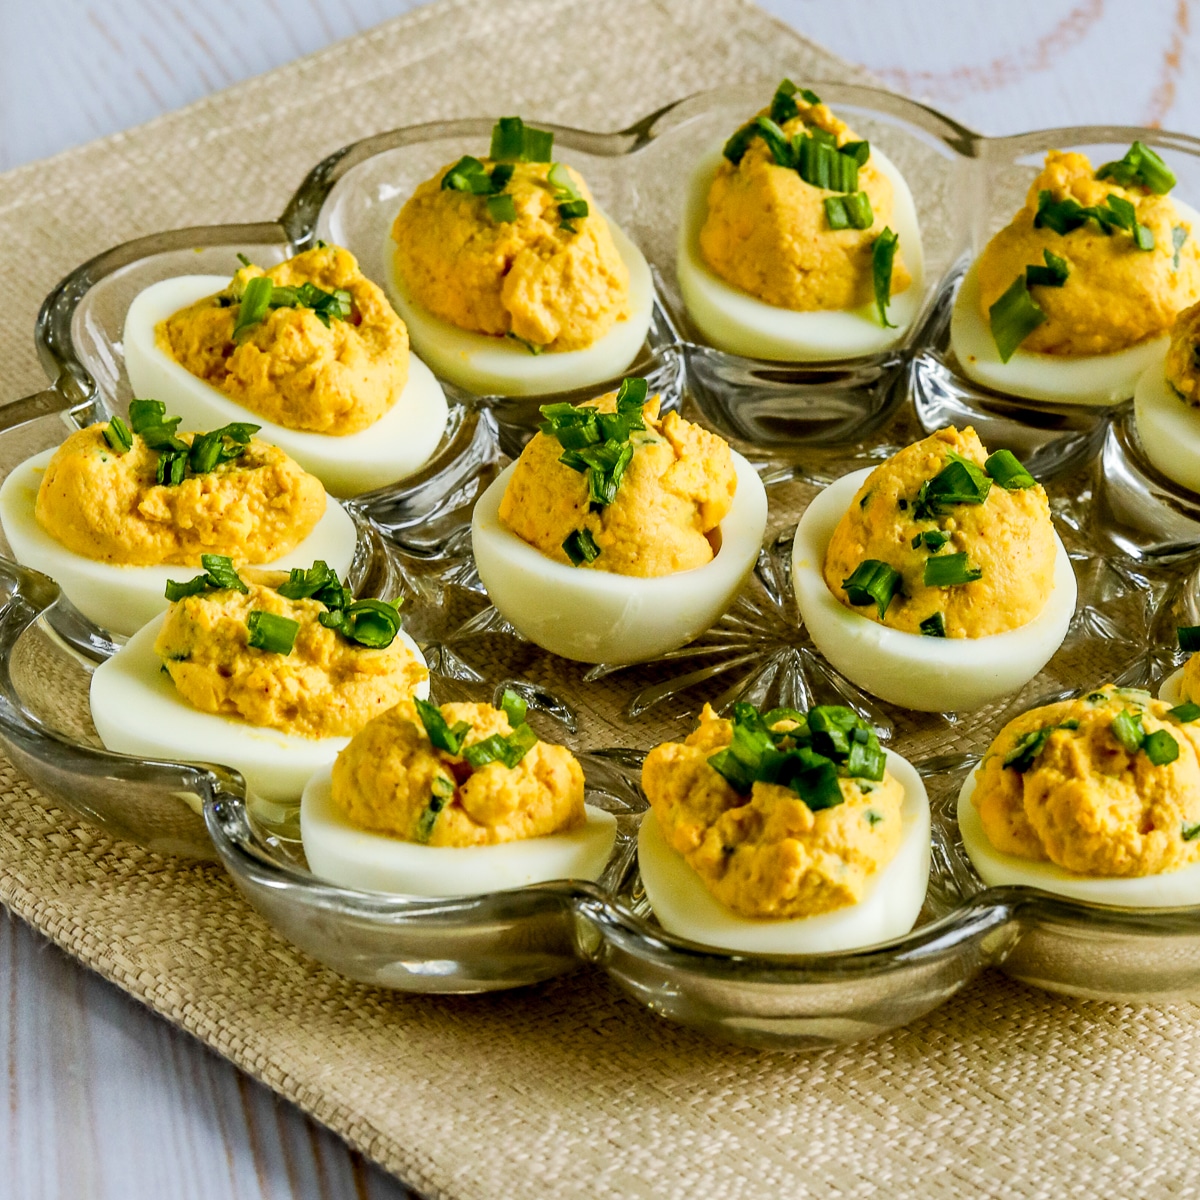 Square image of Spicy Deviled Eggs (with Chipotle and Lime) shown in glass egg dish.